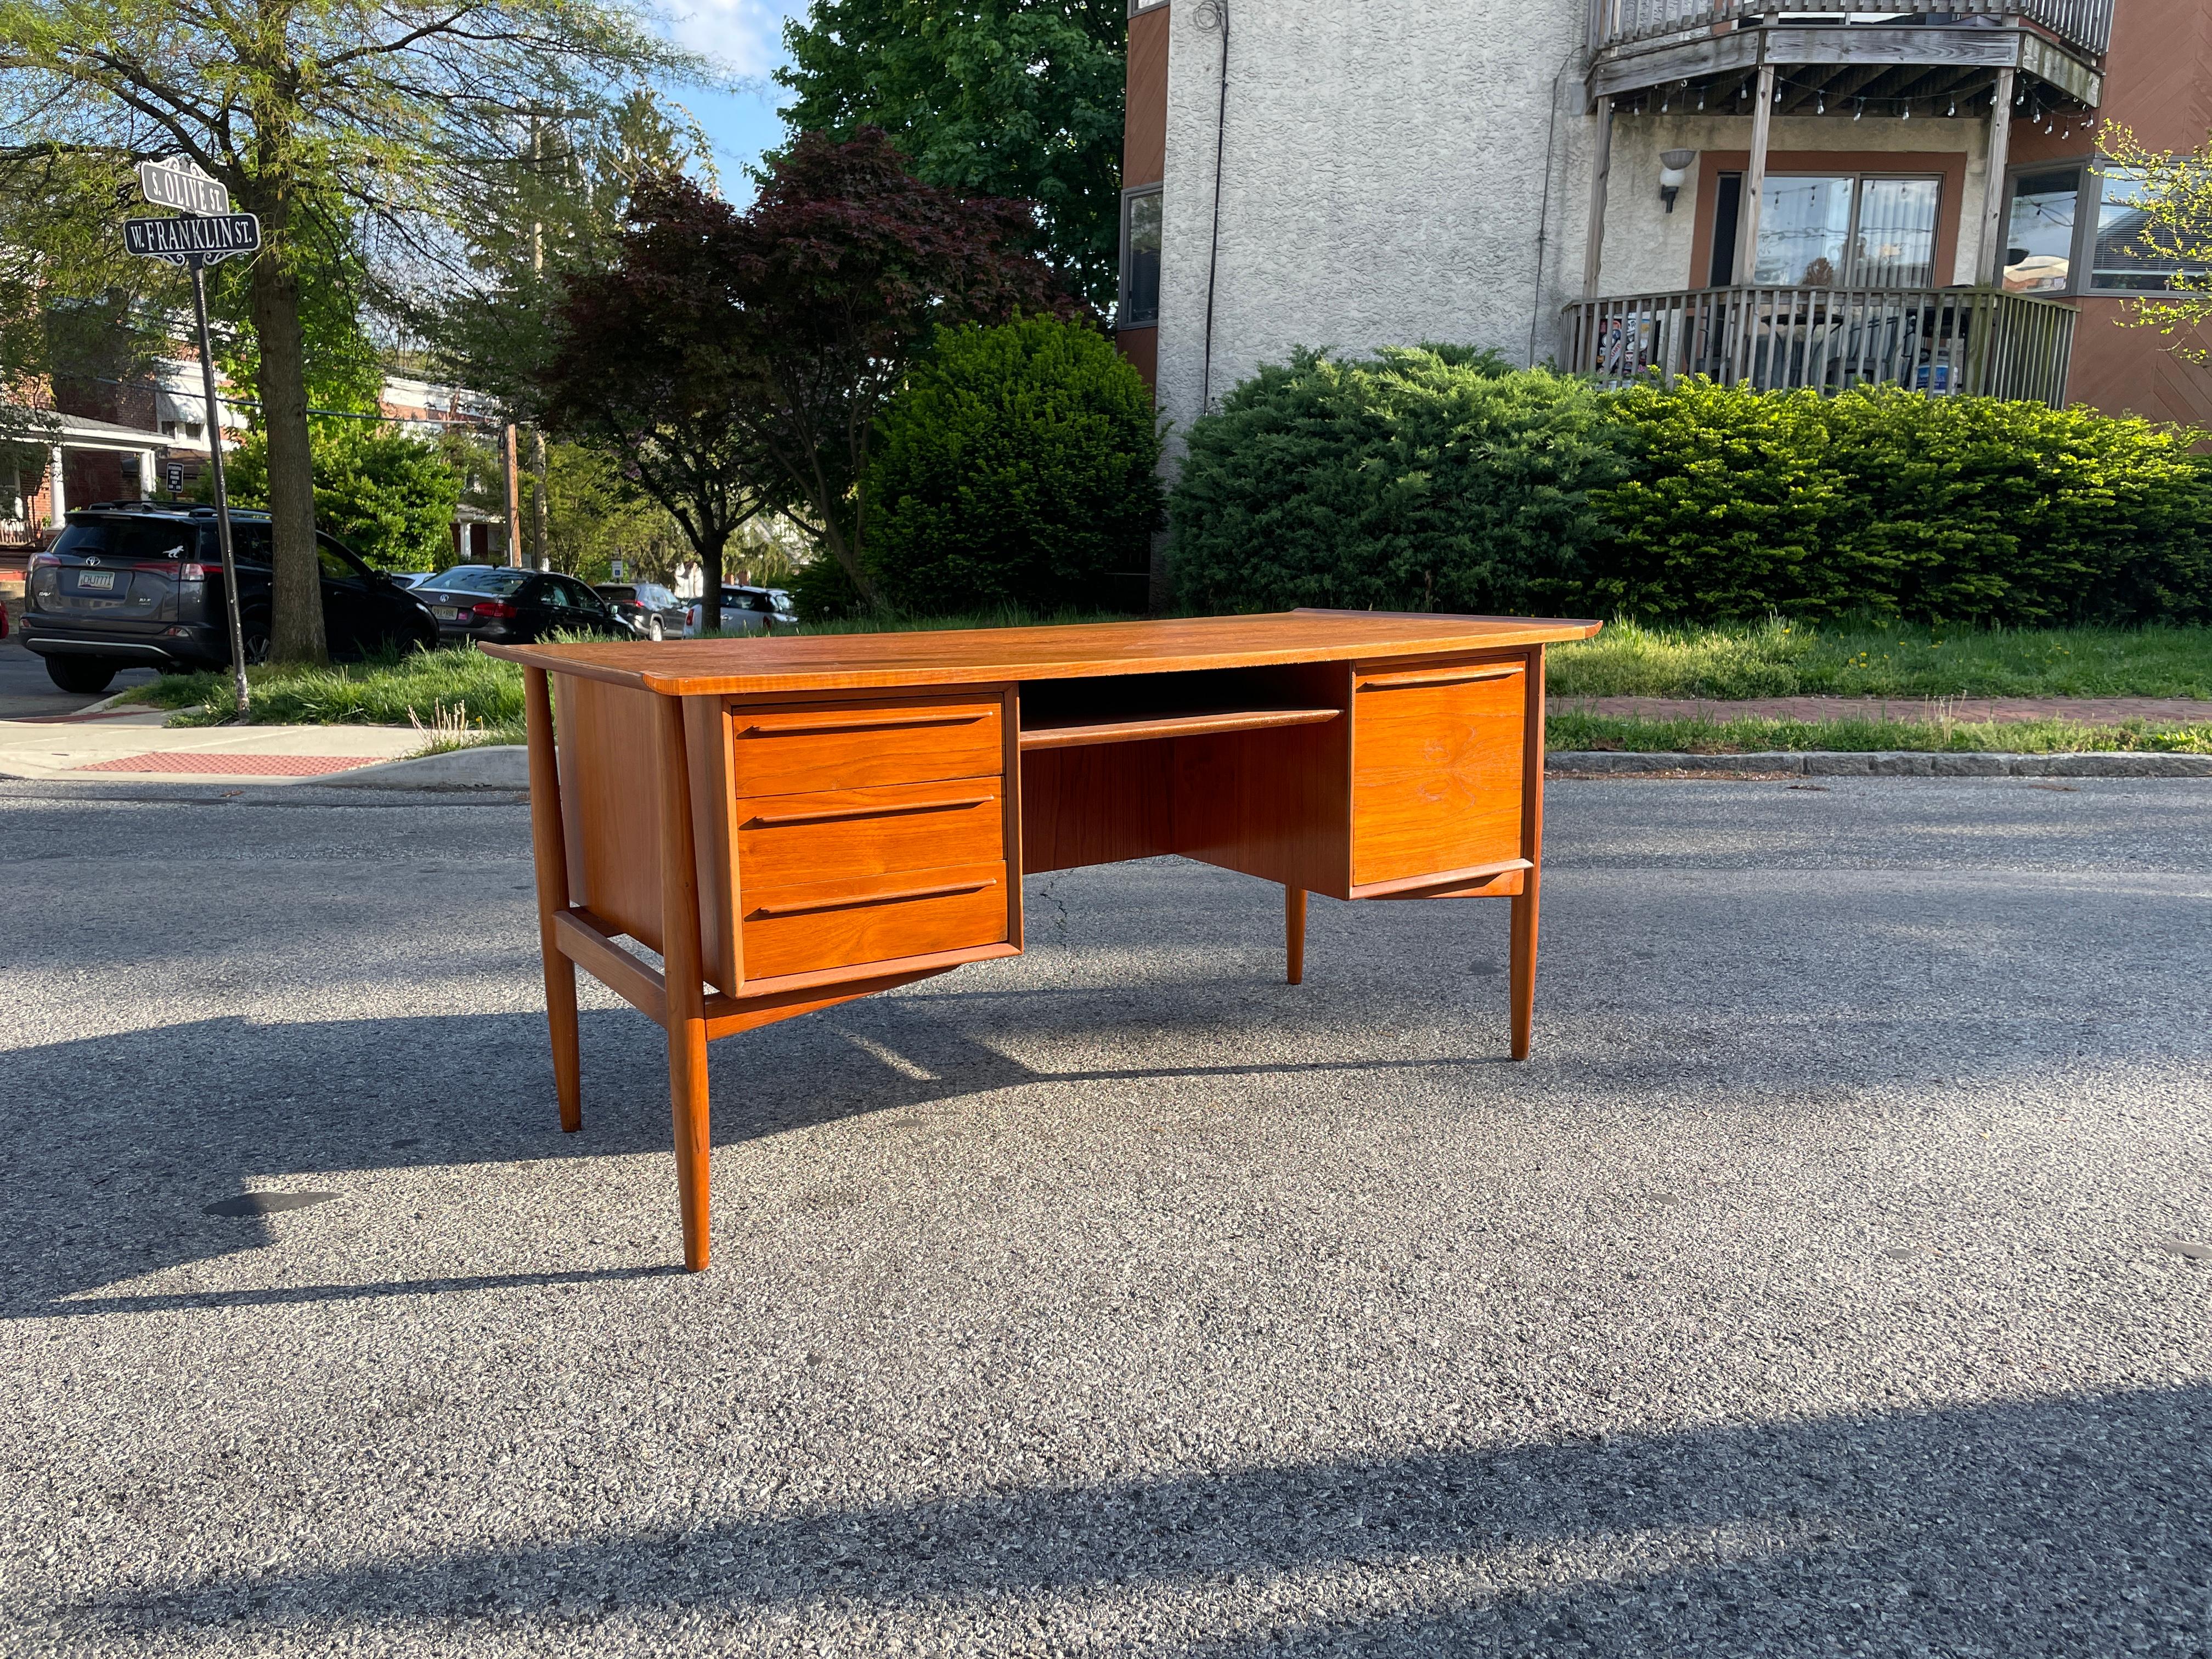 A beautiful teakwood executive desk by Arne Vodder, complete with a bookshelf and locking bar cabinet on the back. The front of the desk has three drawers, one large drawer cabinet, and a cubby slot perfect for storing a keyboard. The top has sleek